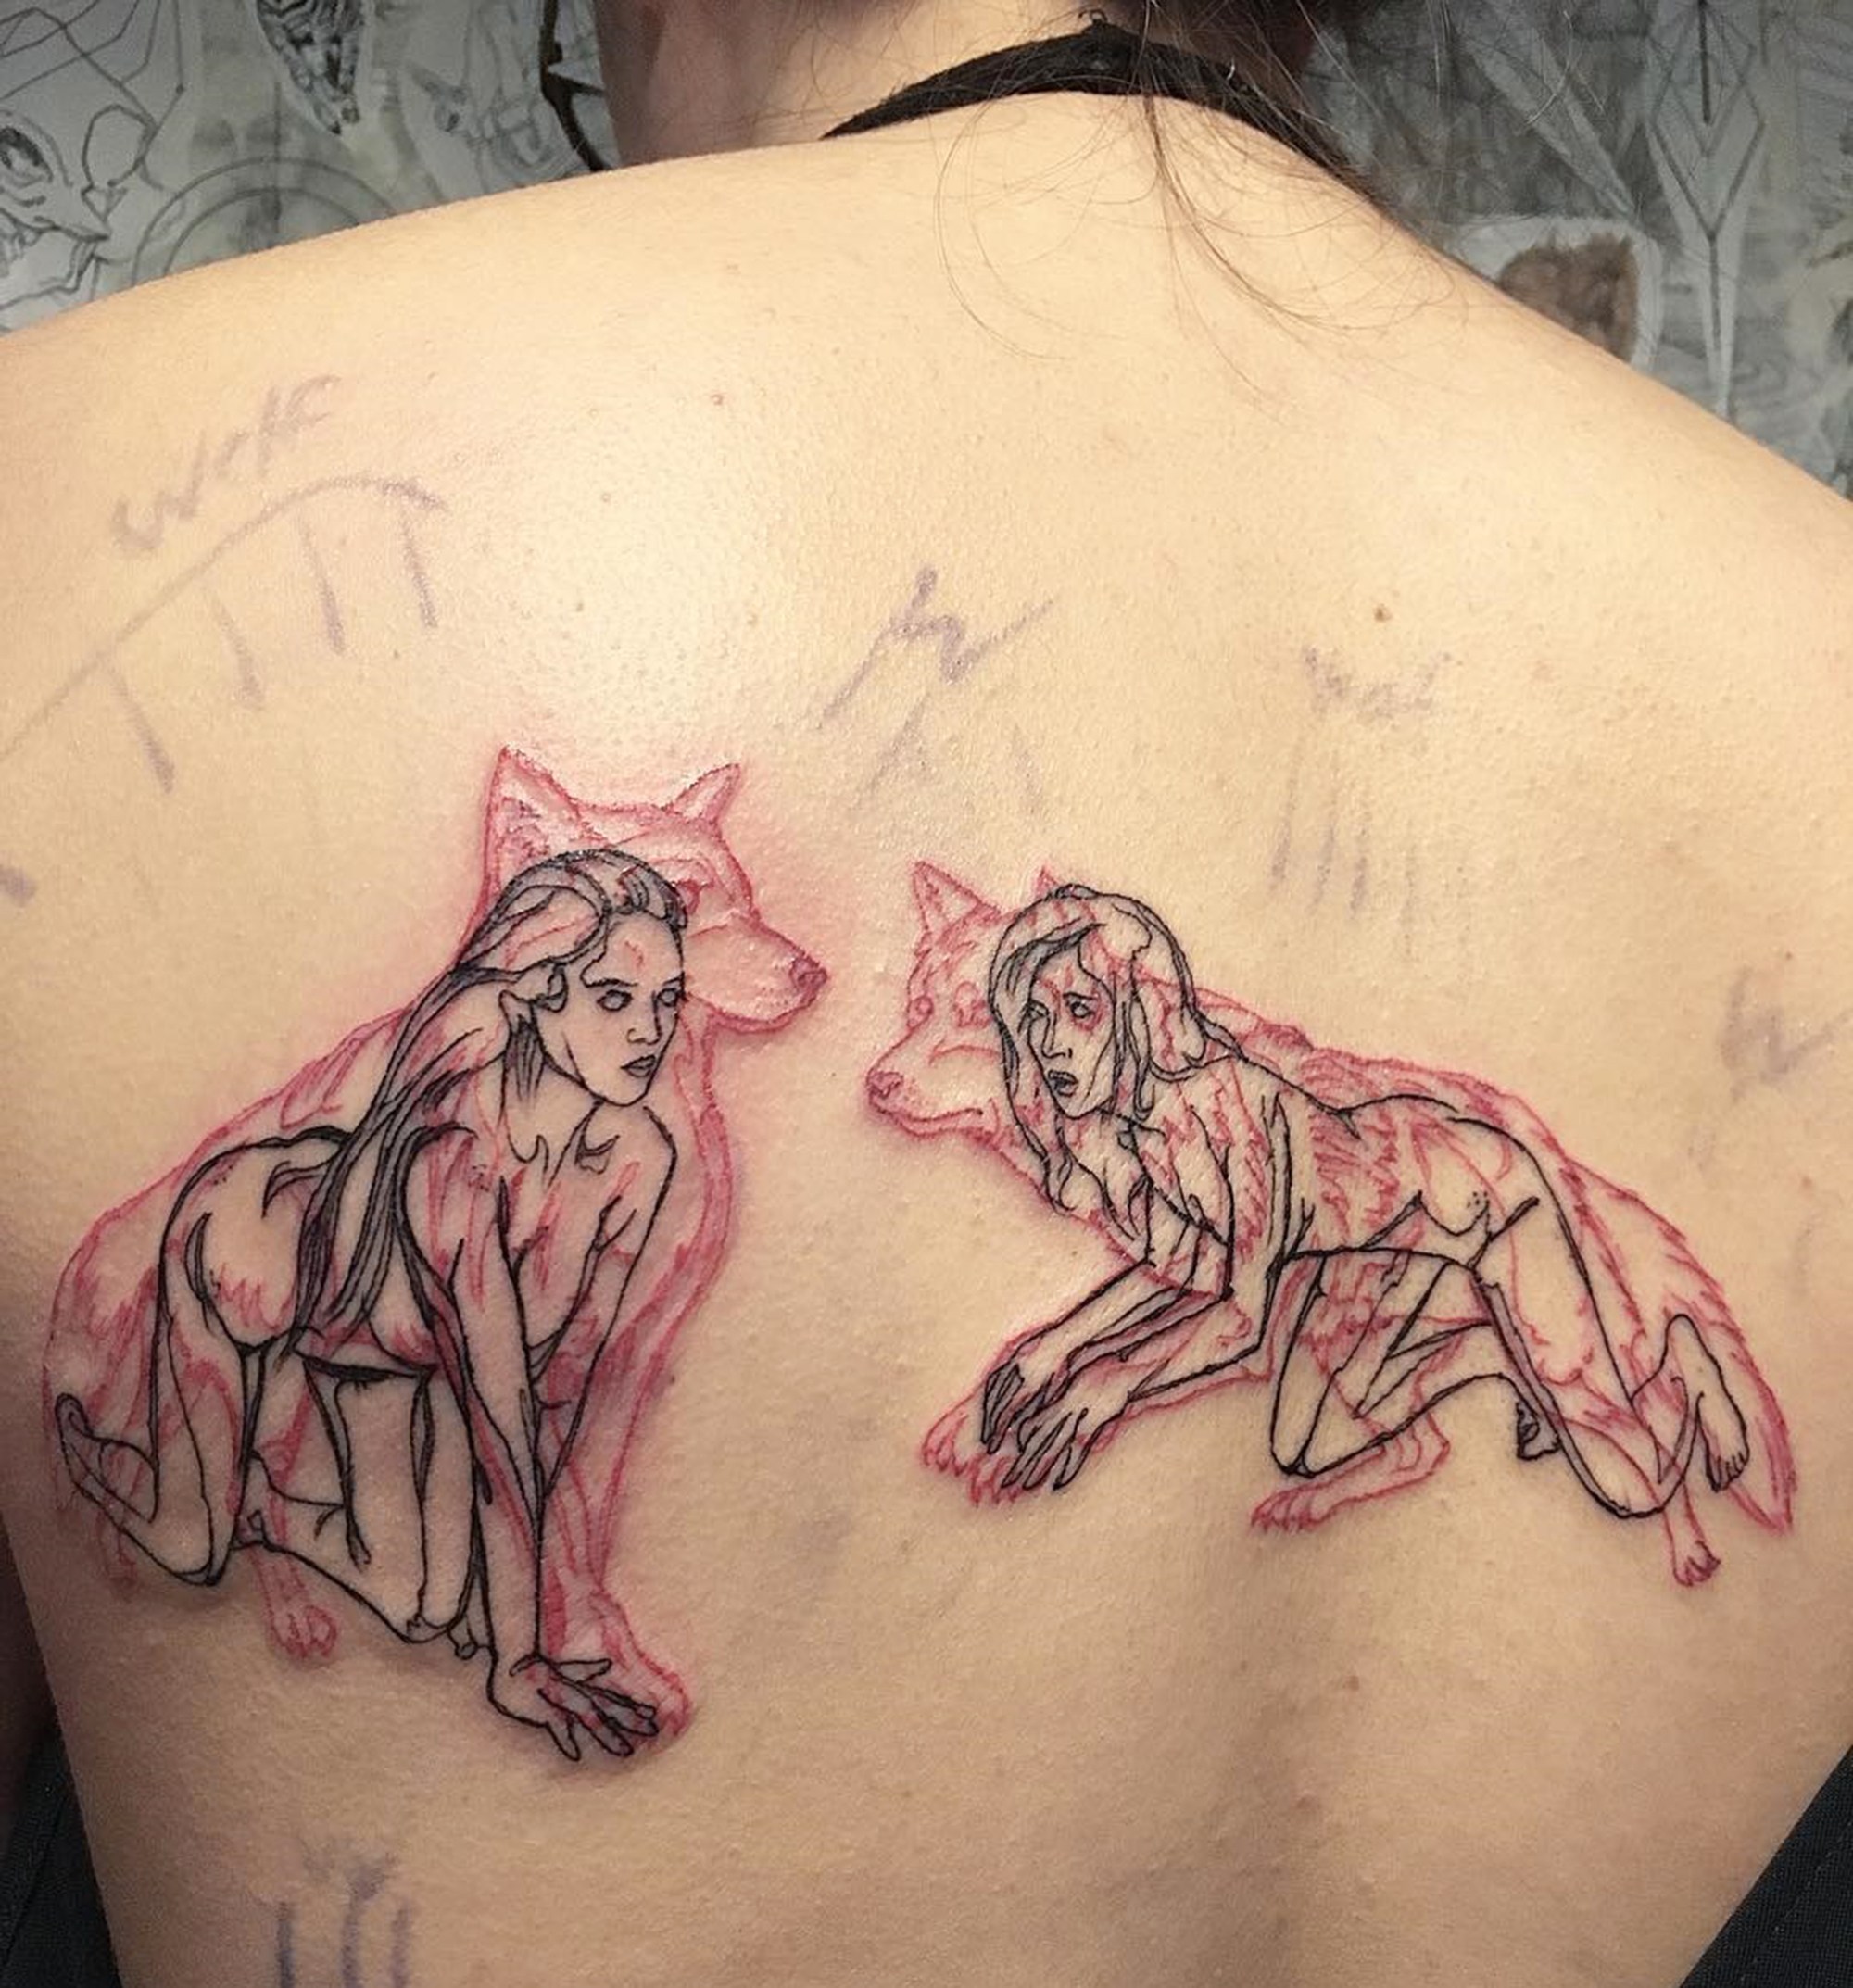 double-up tattoos, wolves and women, red and black